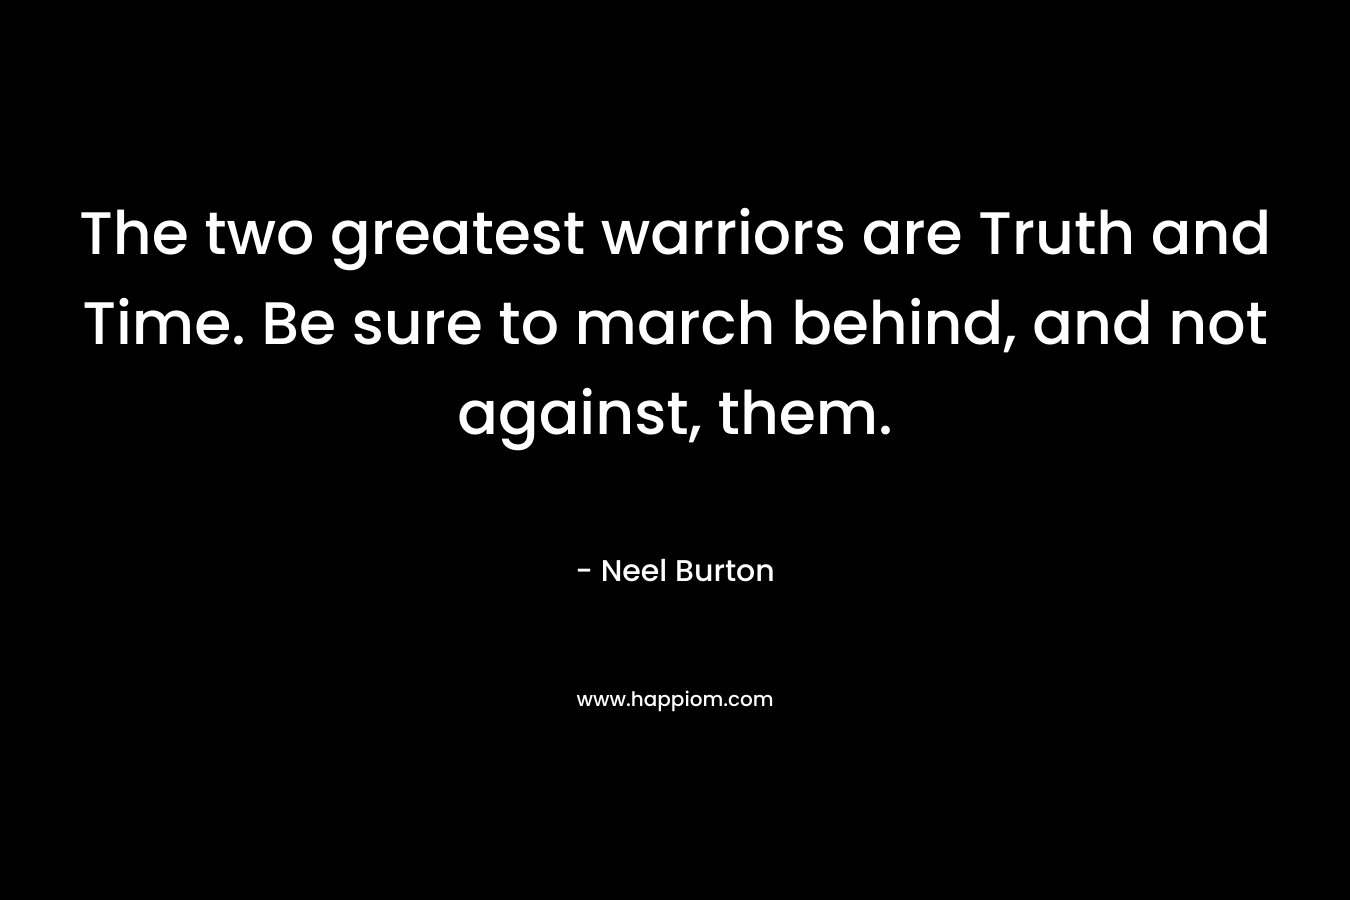 The two greatest warriors are Truth and Time. Be sure to march behind, and not against, them.